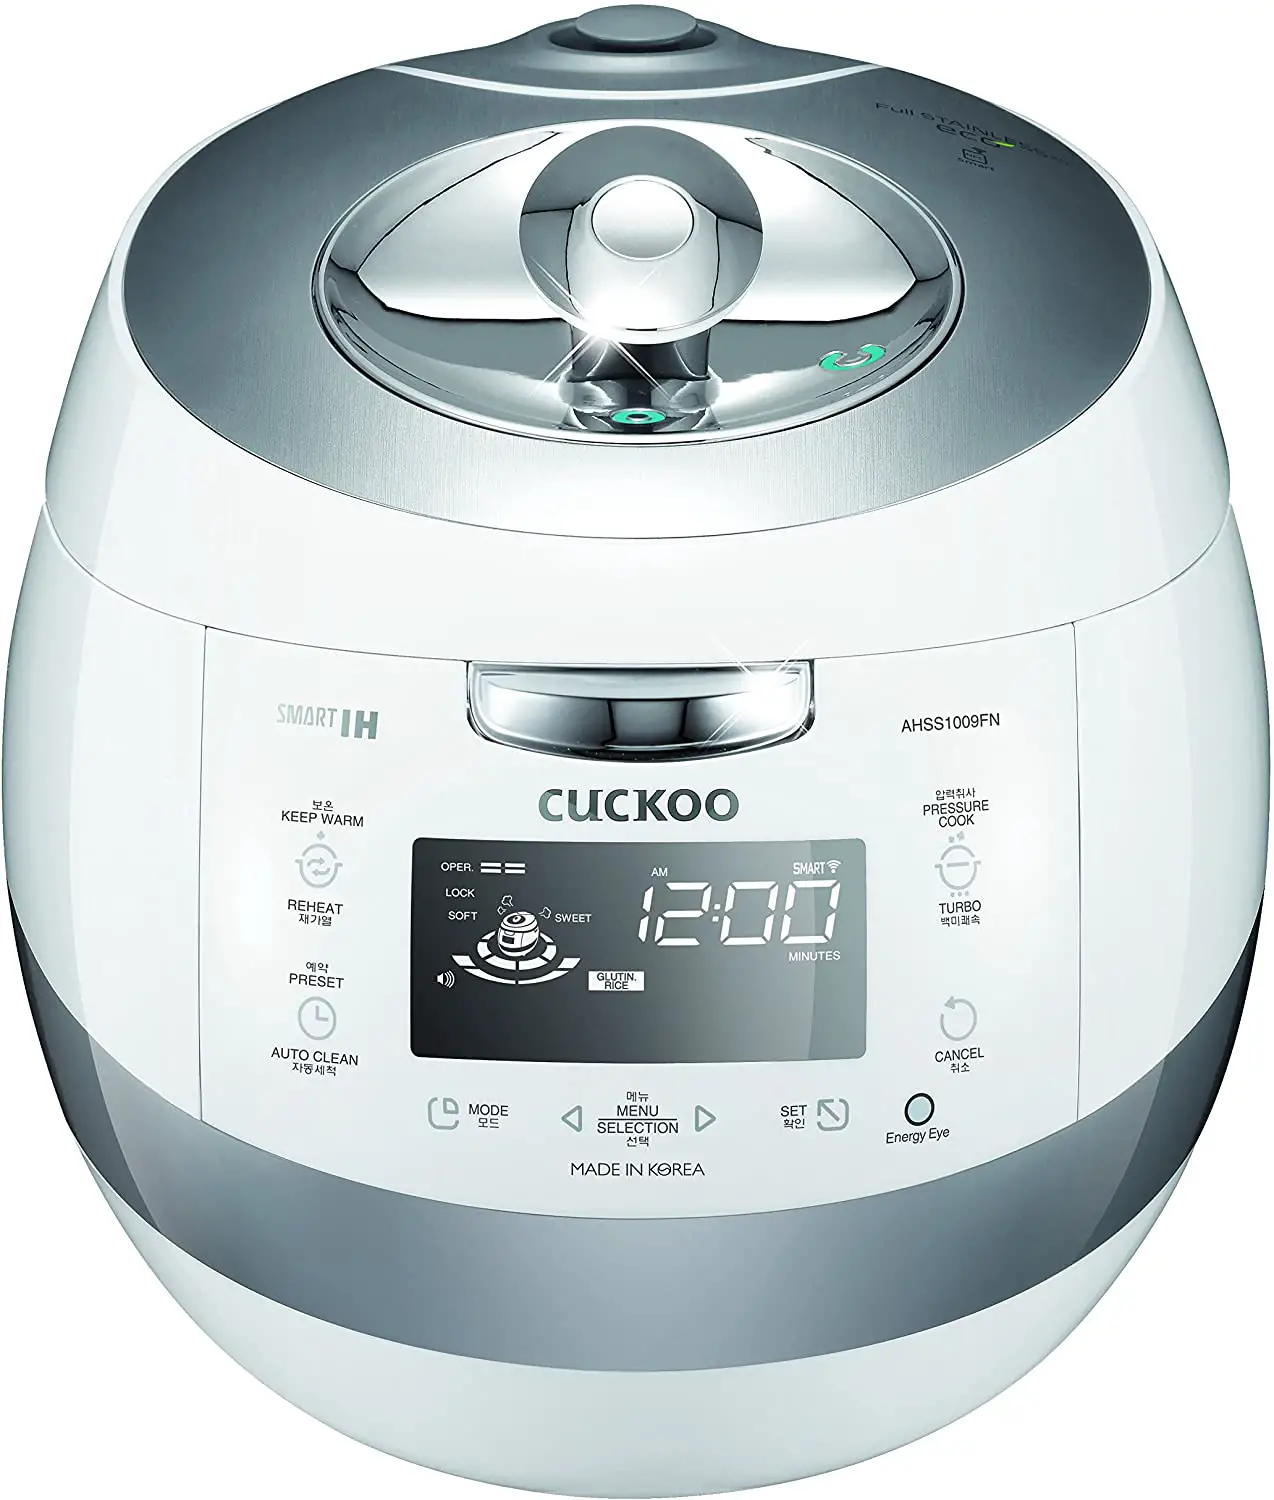 Top 5 Best Cuckoo Rice Cookers To Buy (2021) | Buyer’s Guide & Reviews